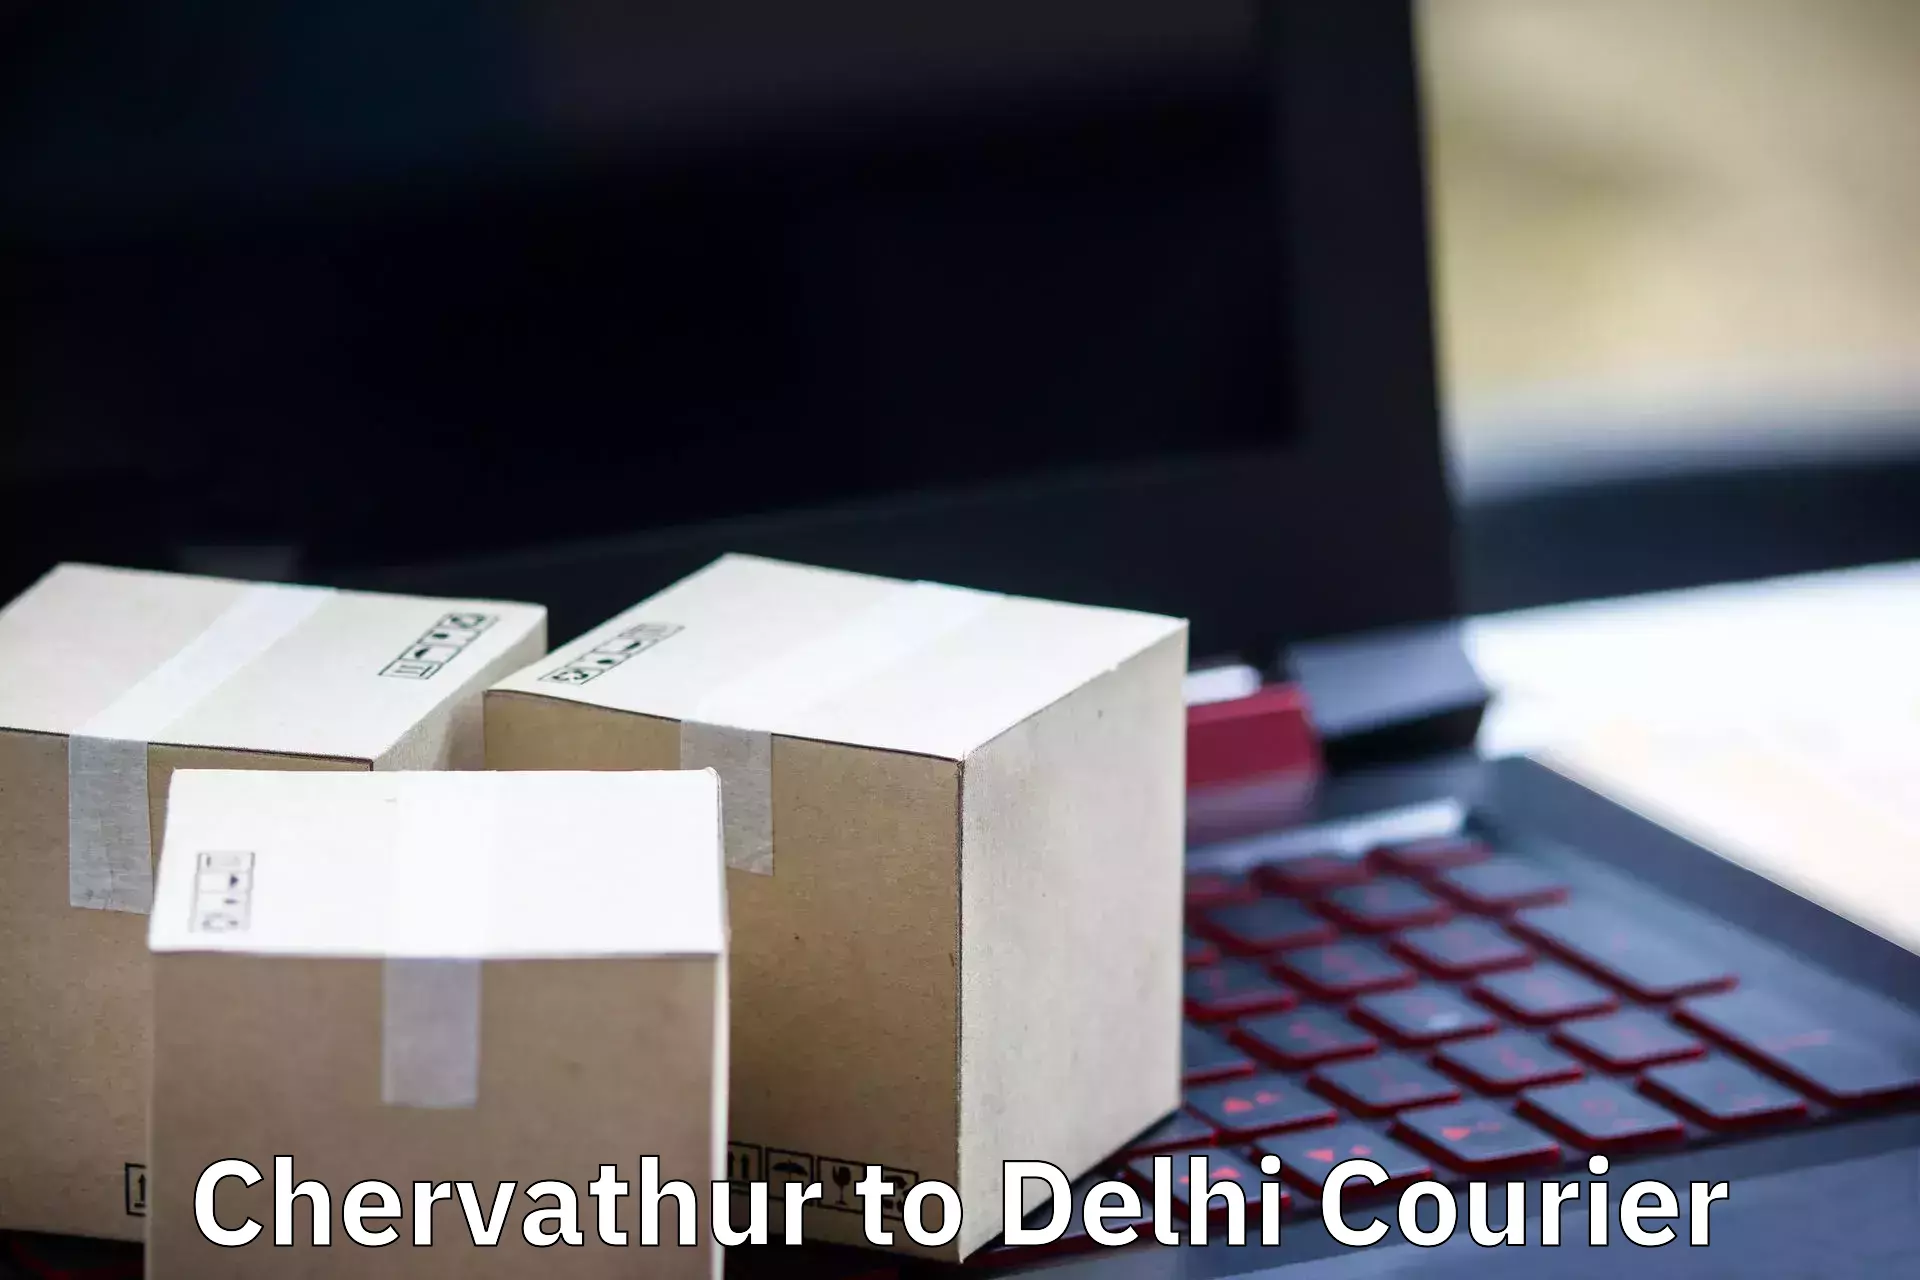 Skilled furniture movers Chervathur to University of Delhi